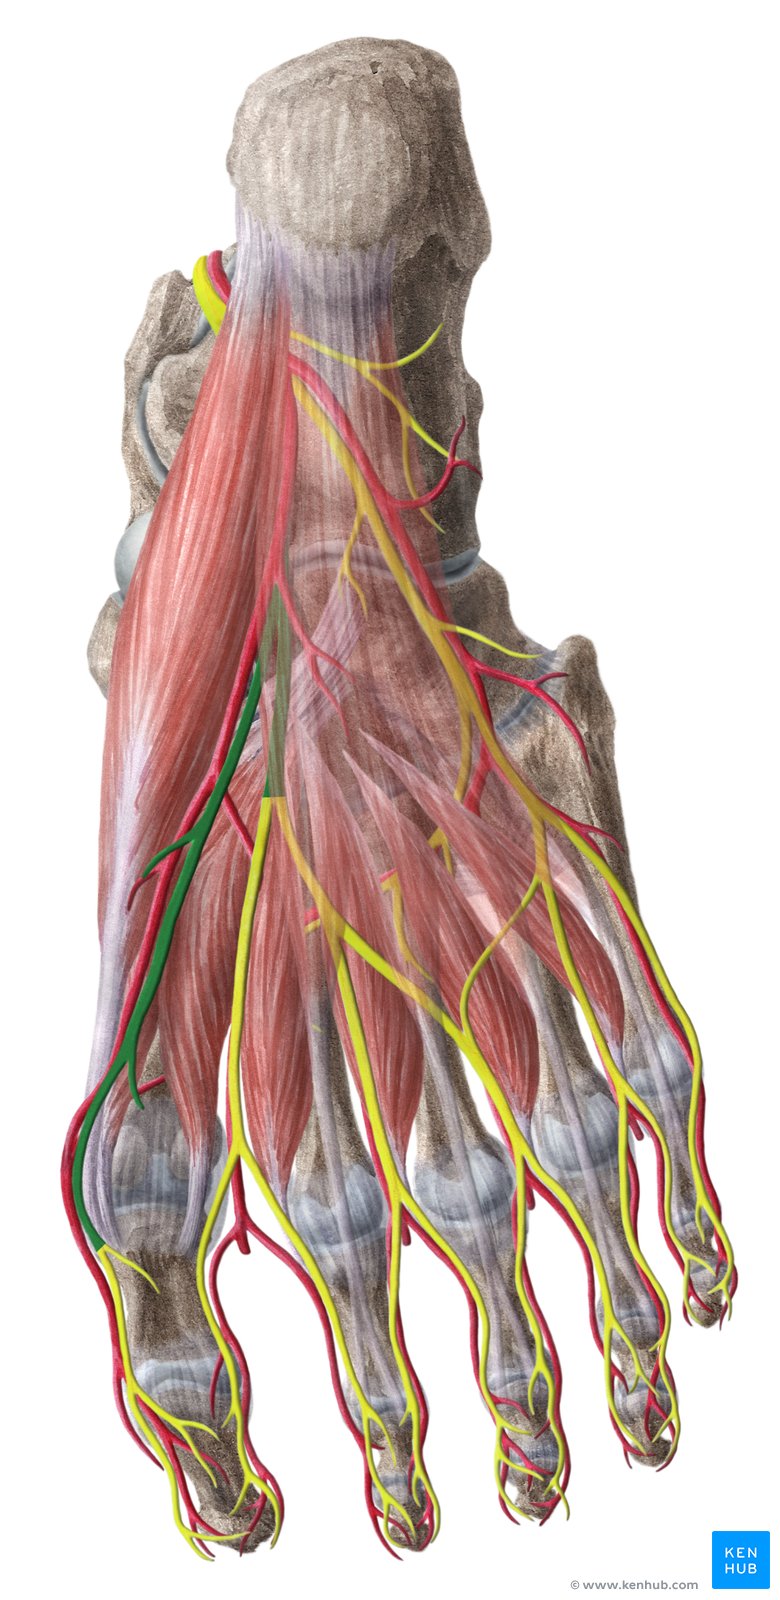 Central plantar muscles of the foot: Anatomy | Kenhub